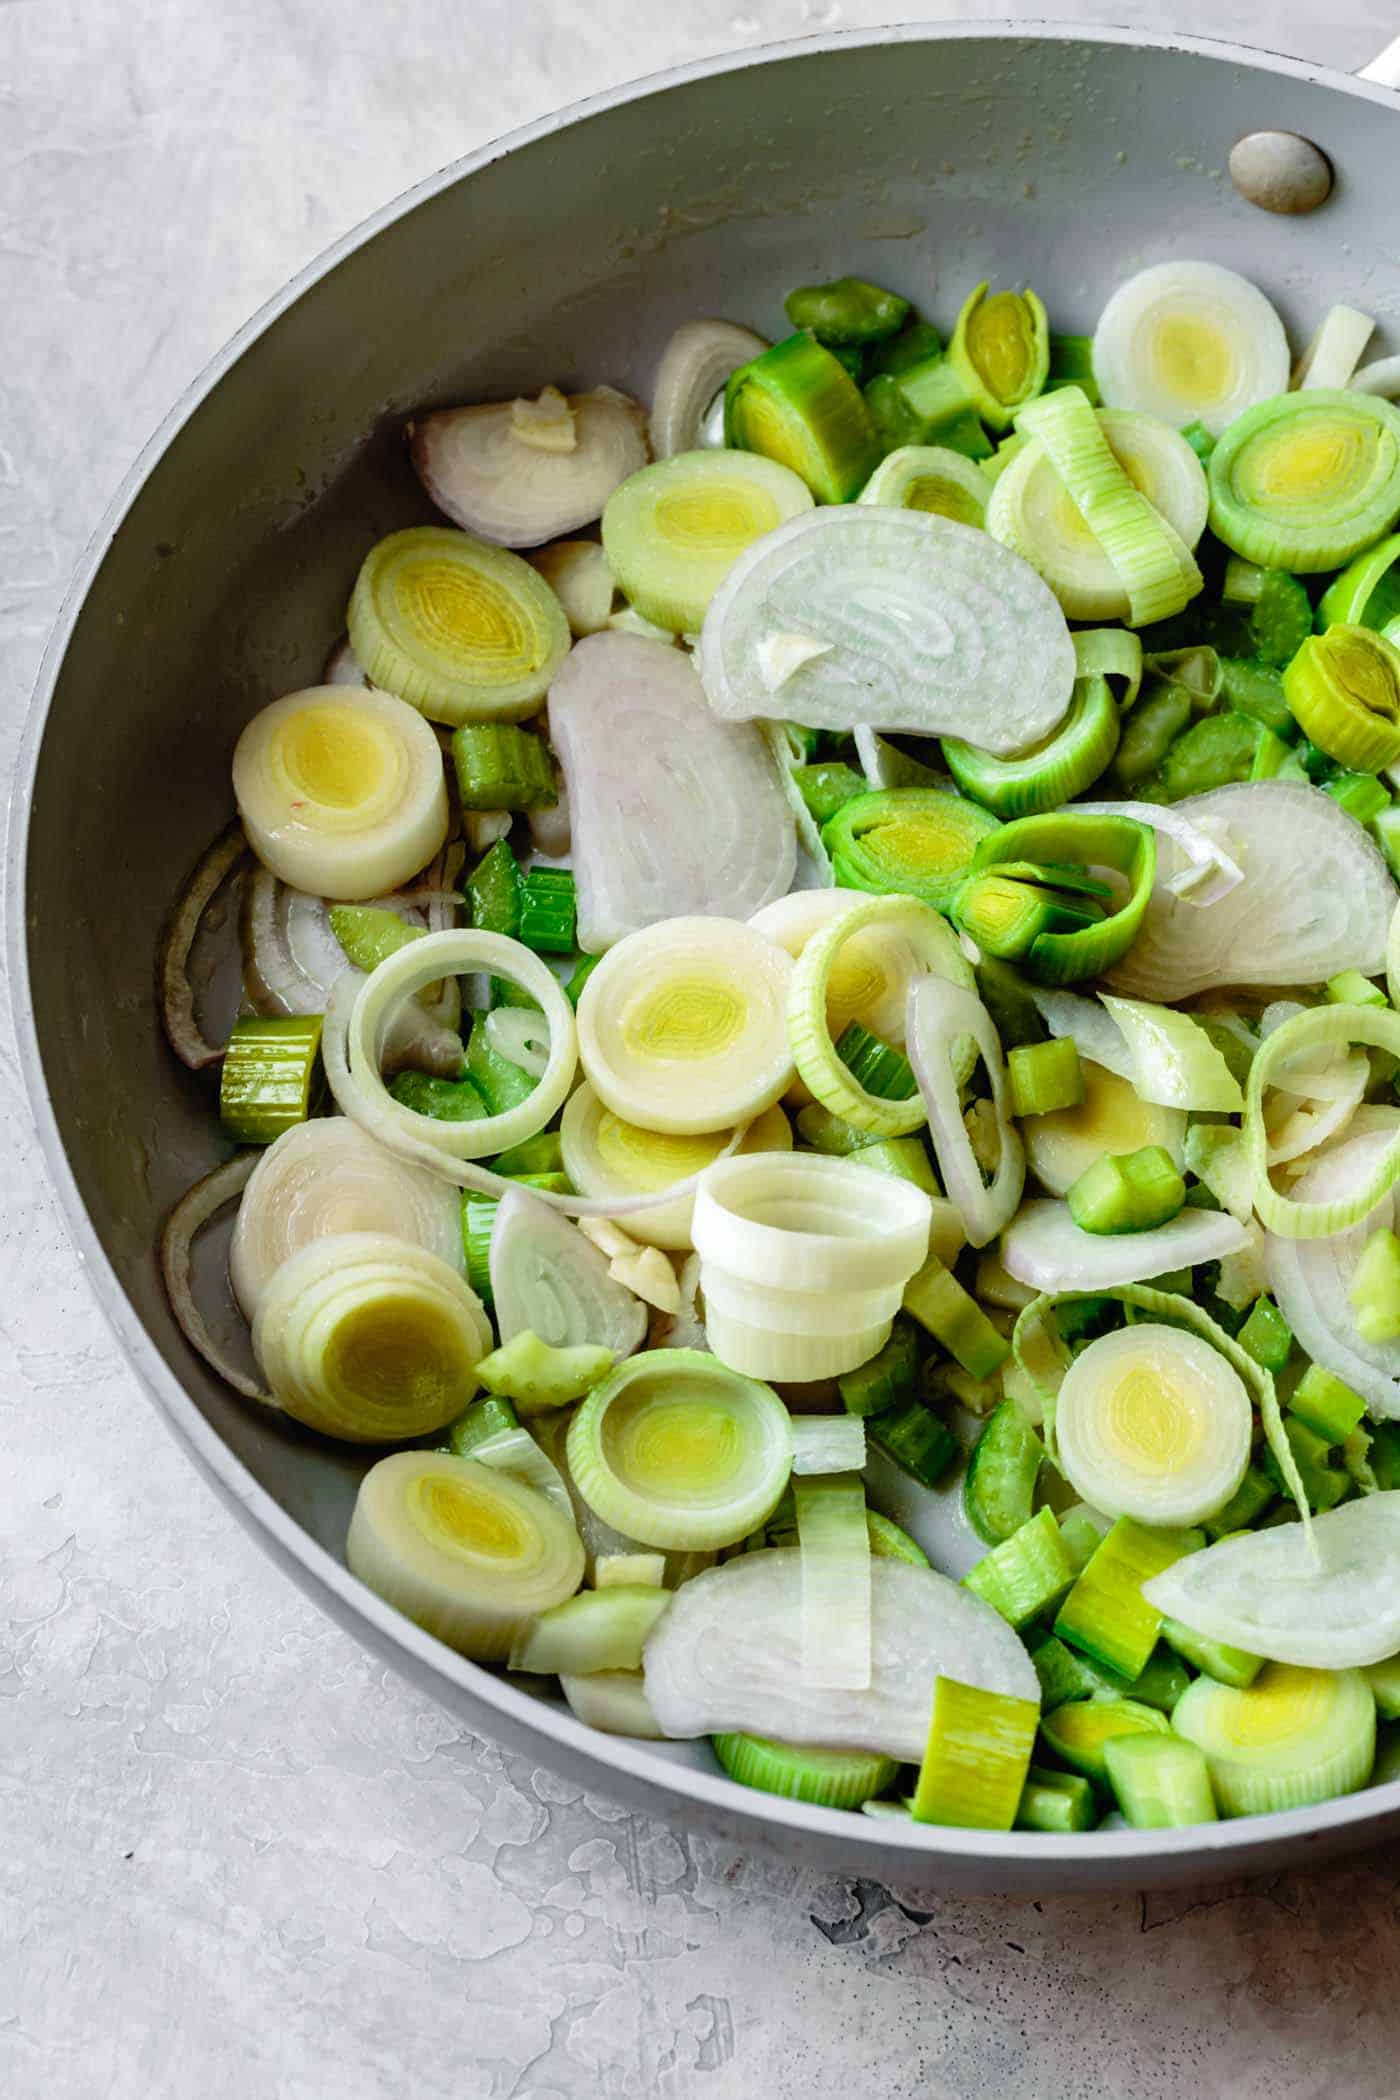 Cooking leeks, shallots, and celery for simple gluten-free stuffing recipe